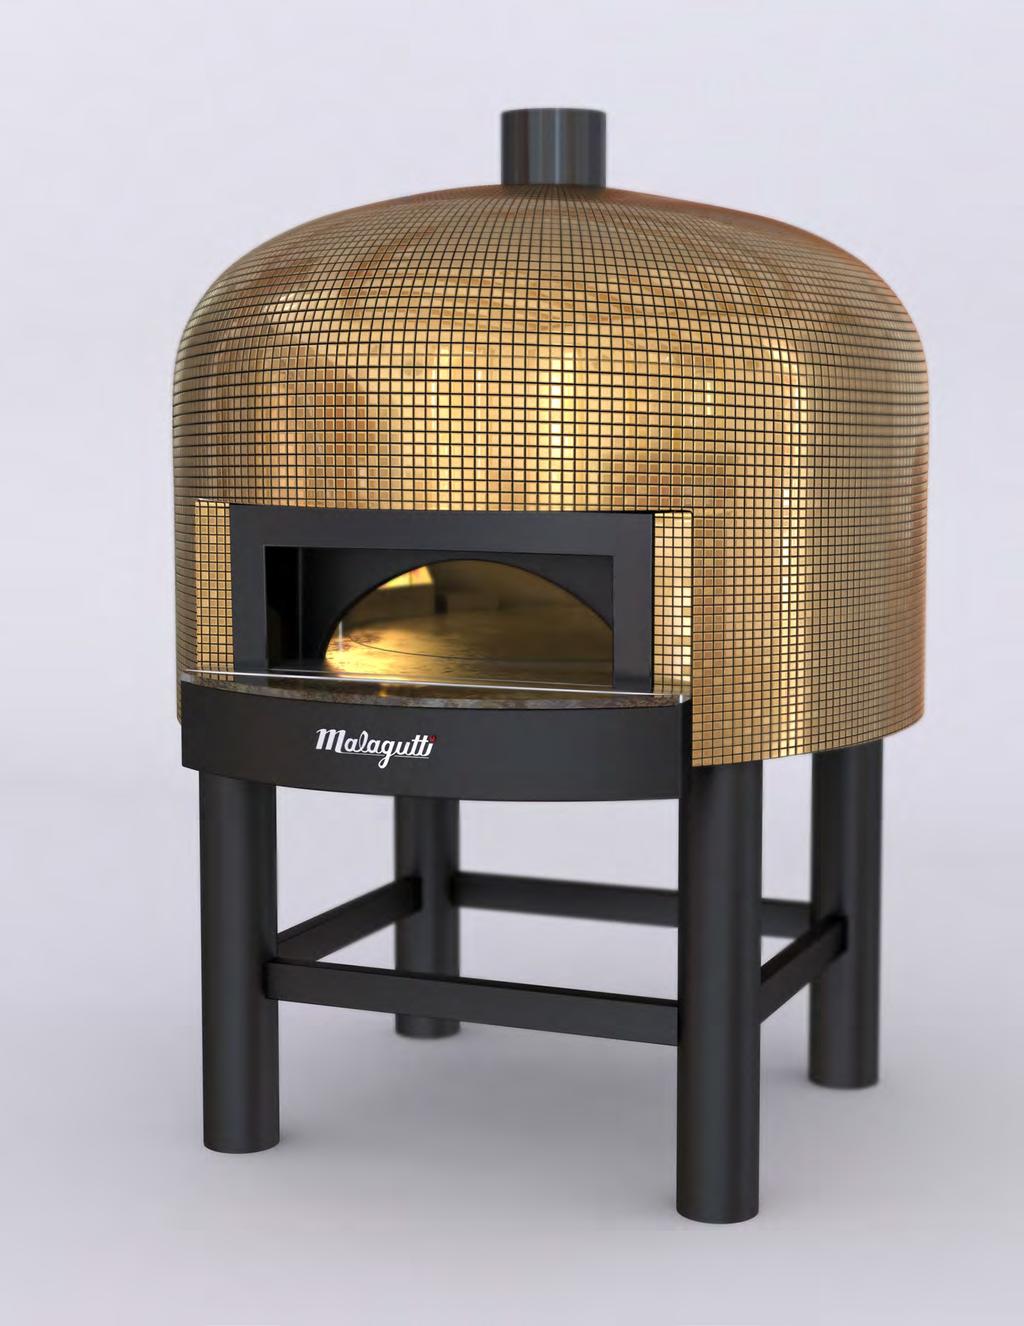 NAPOLI This latest addition to our wood-fired pizza ovens has already seduced pizza makers across Europe and North America.